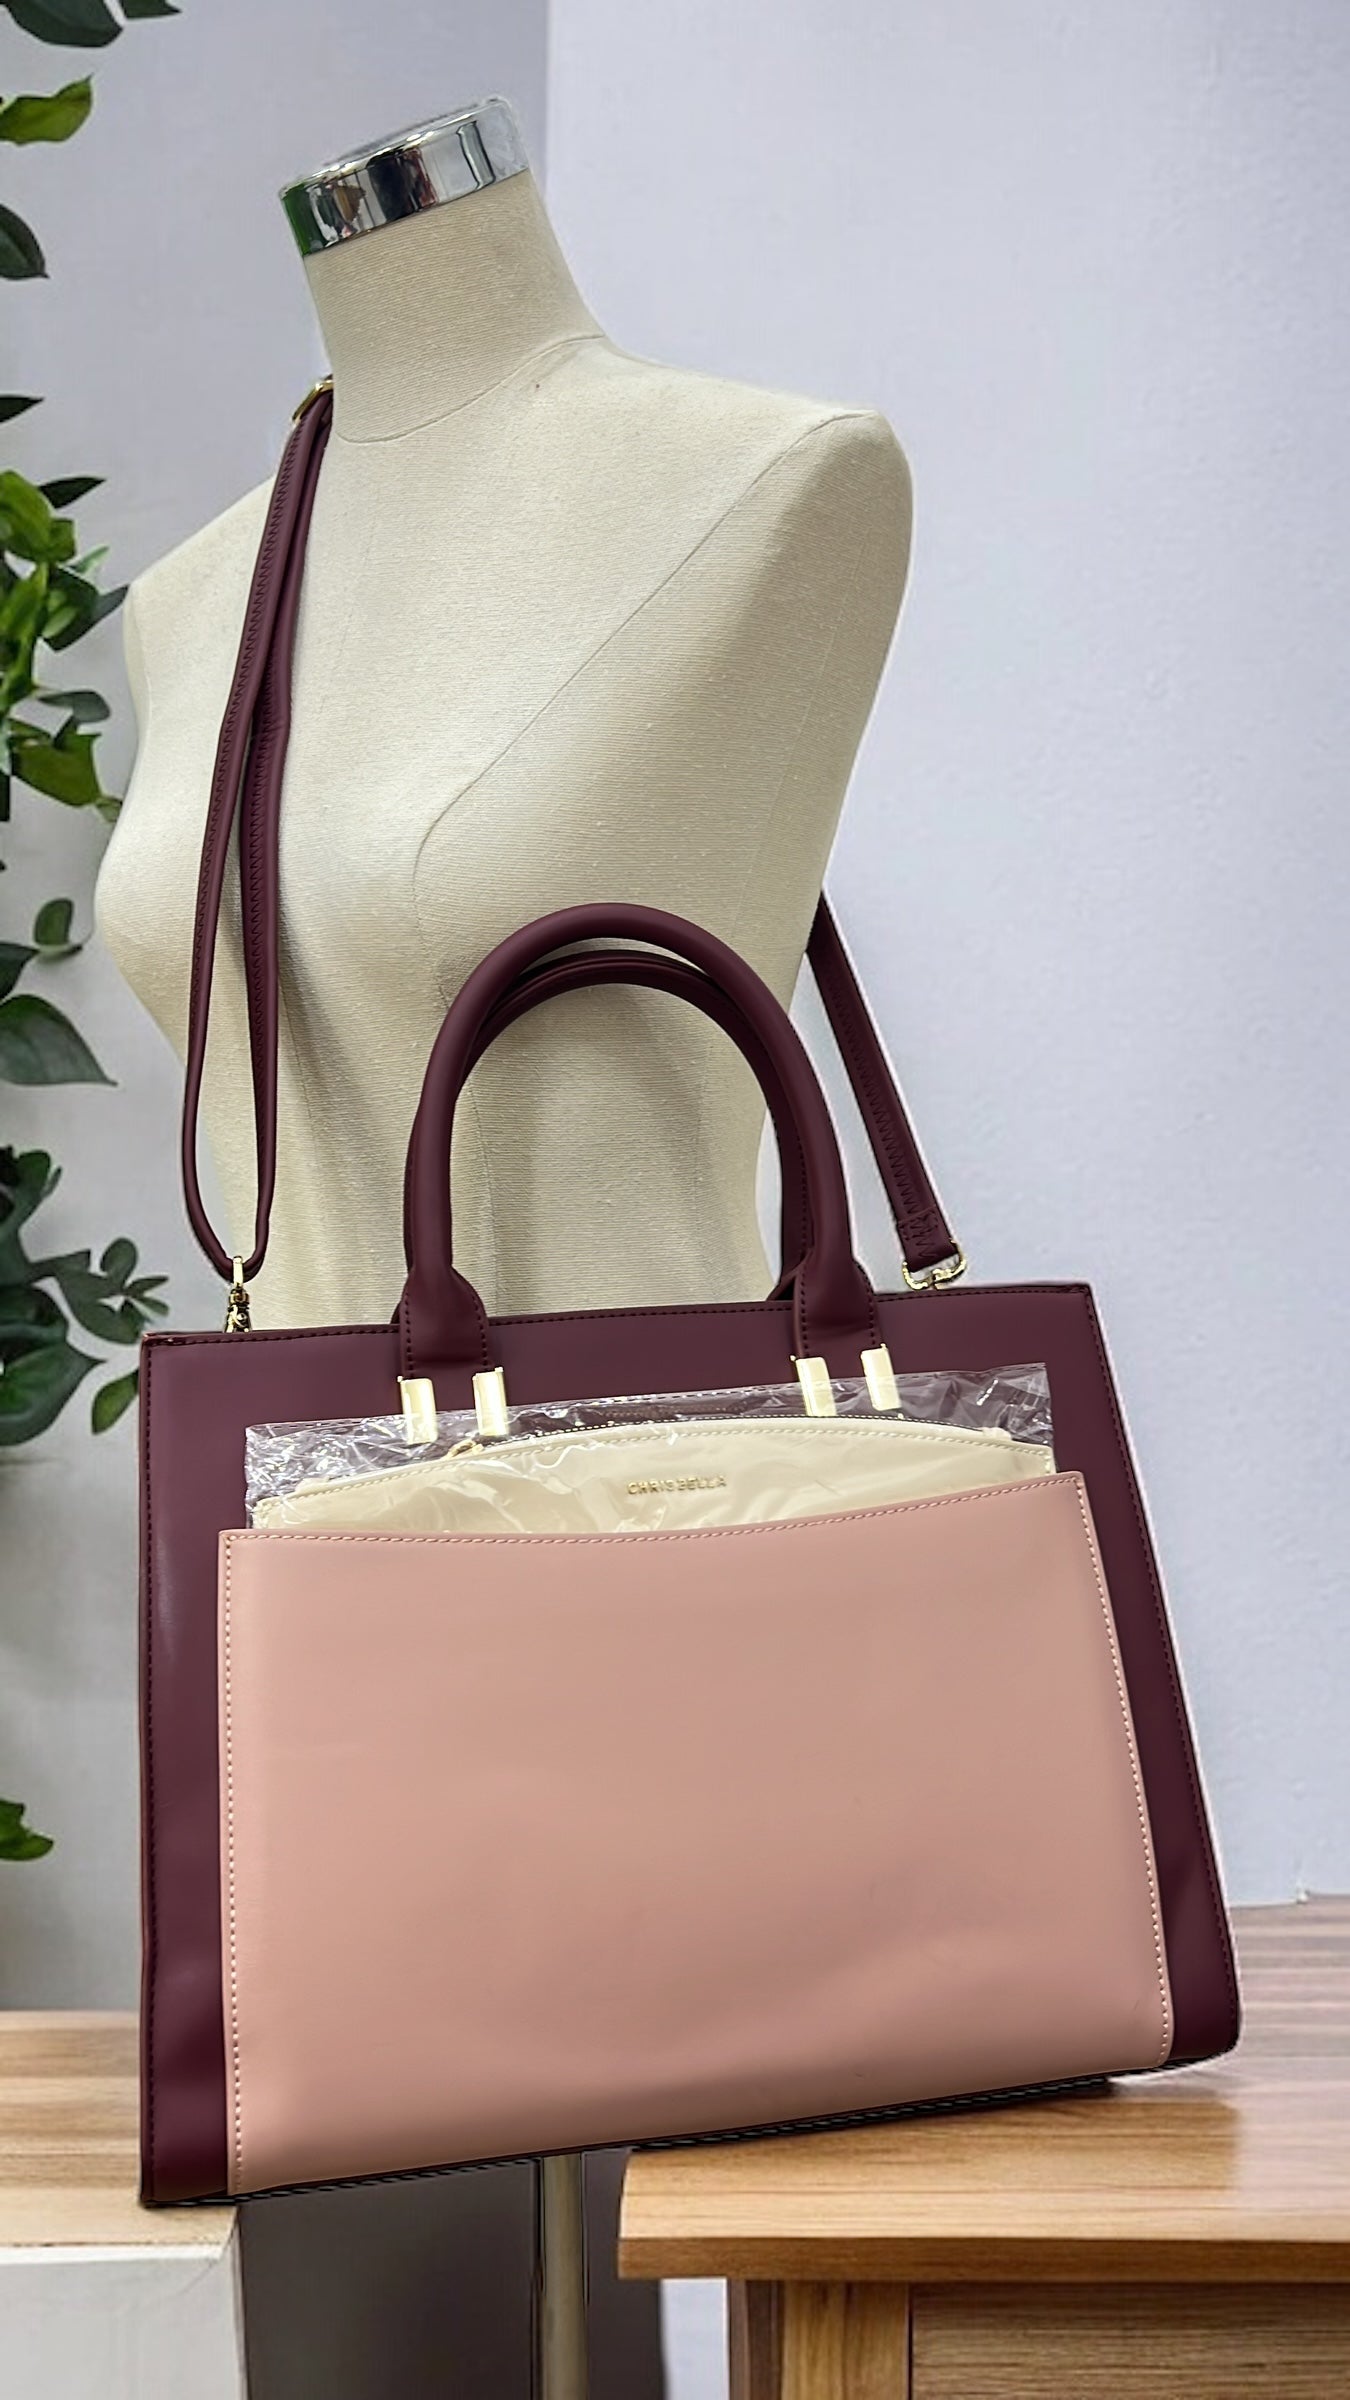 CHRISBELLA TWO-TONE BAG WITH REMOVABLE POCKET IN MAROON